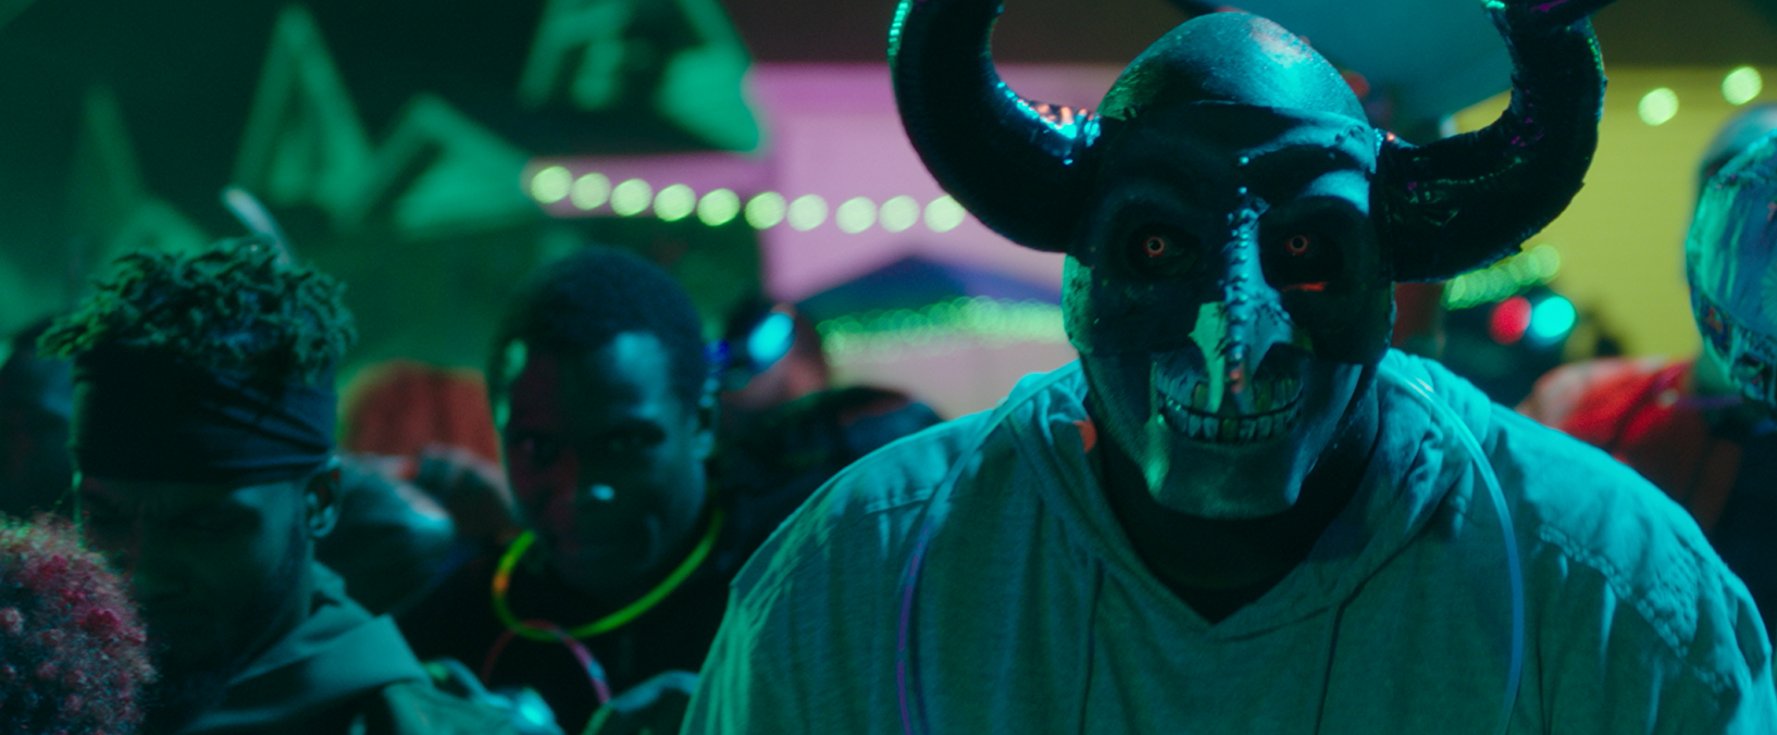 A person in a scary horned mask is in the foreground as black men are possibly partying amid a disturbing color scheme.